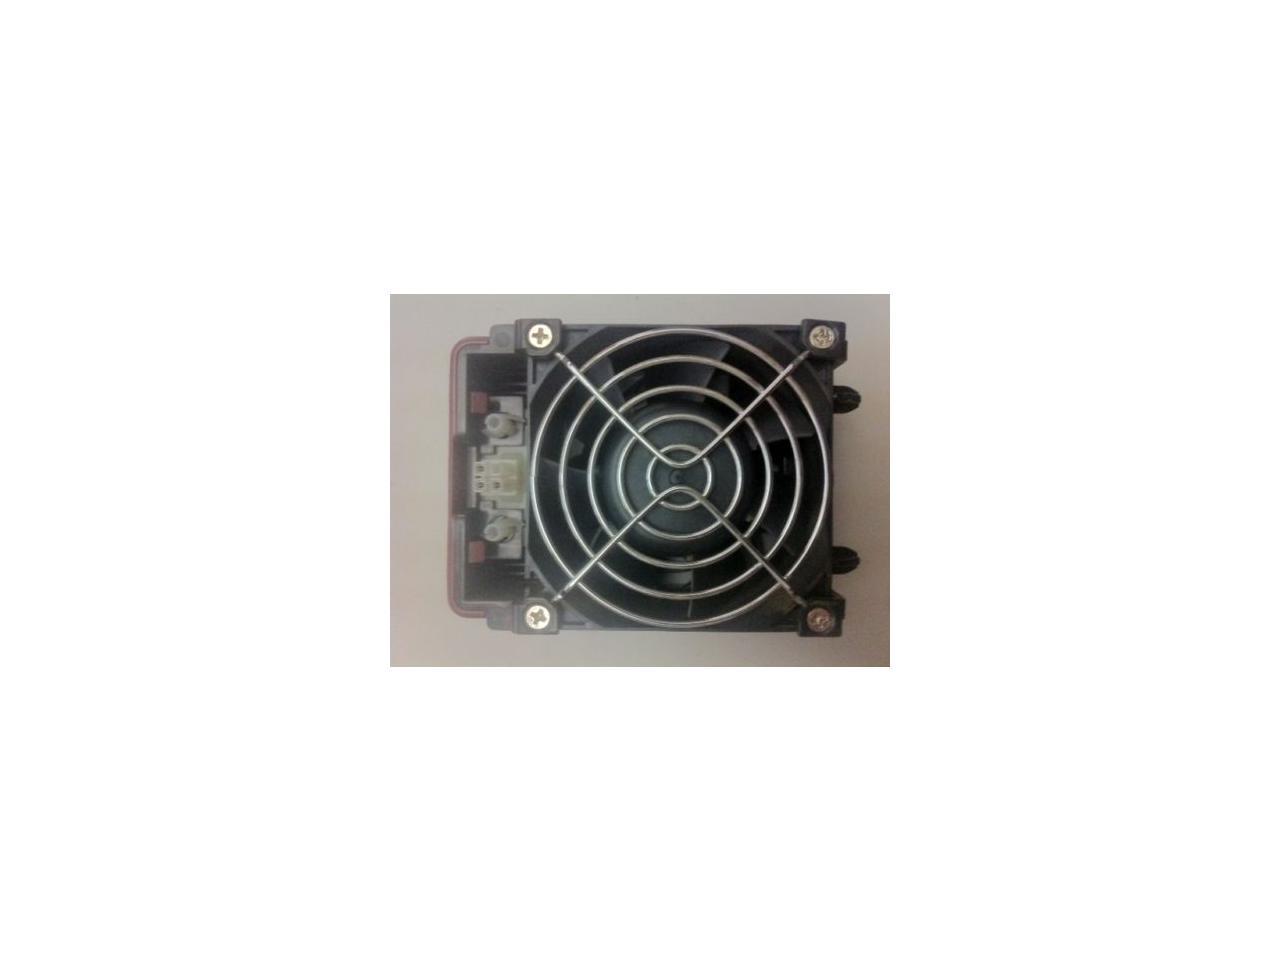 The620Guy Lot of 2 Supermicro FAN-0081L 5000 RPM Hot-Swappable Rear Exhaust Fan Assembly 